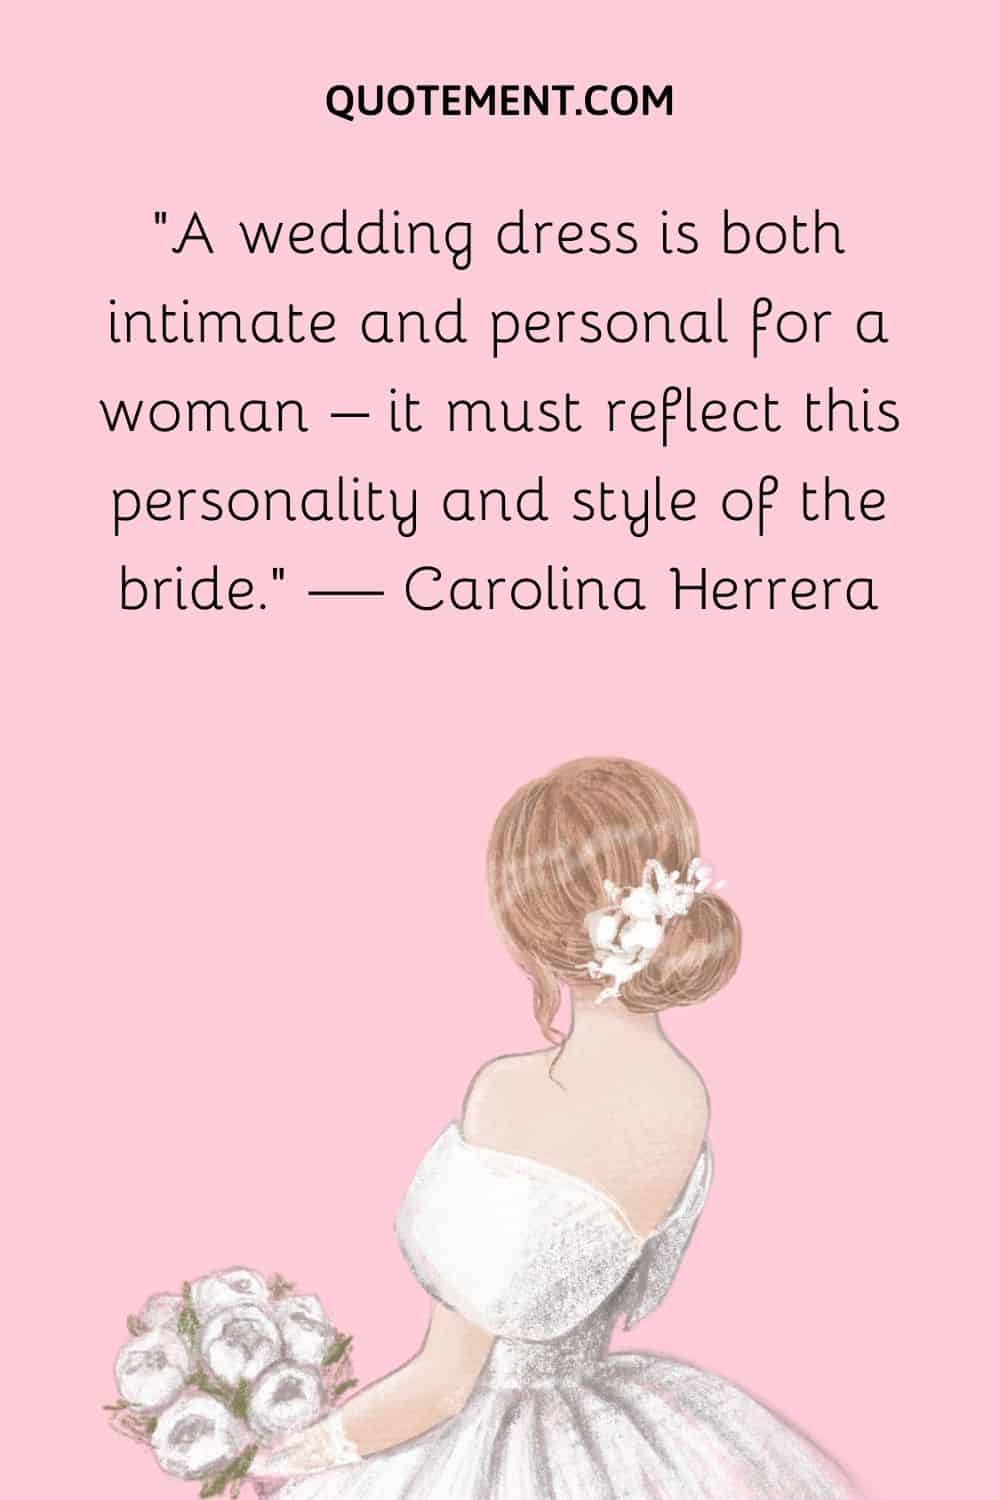 A wedding dress is both intimate and personal for a woman – it must reflect this personality and style of the bride. — Carolina Herrera